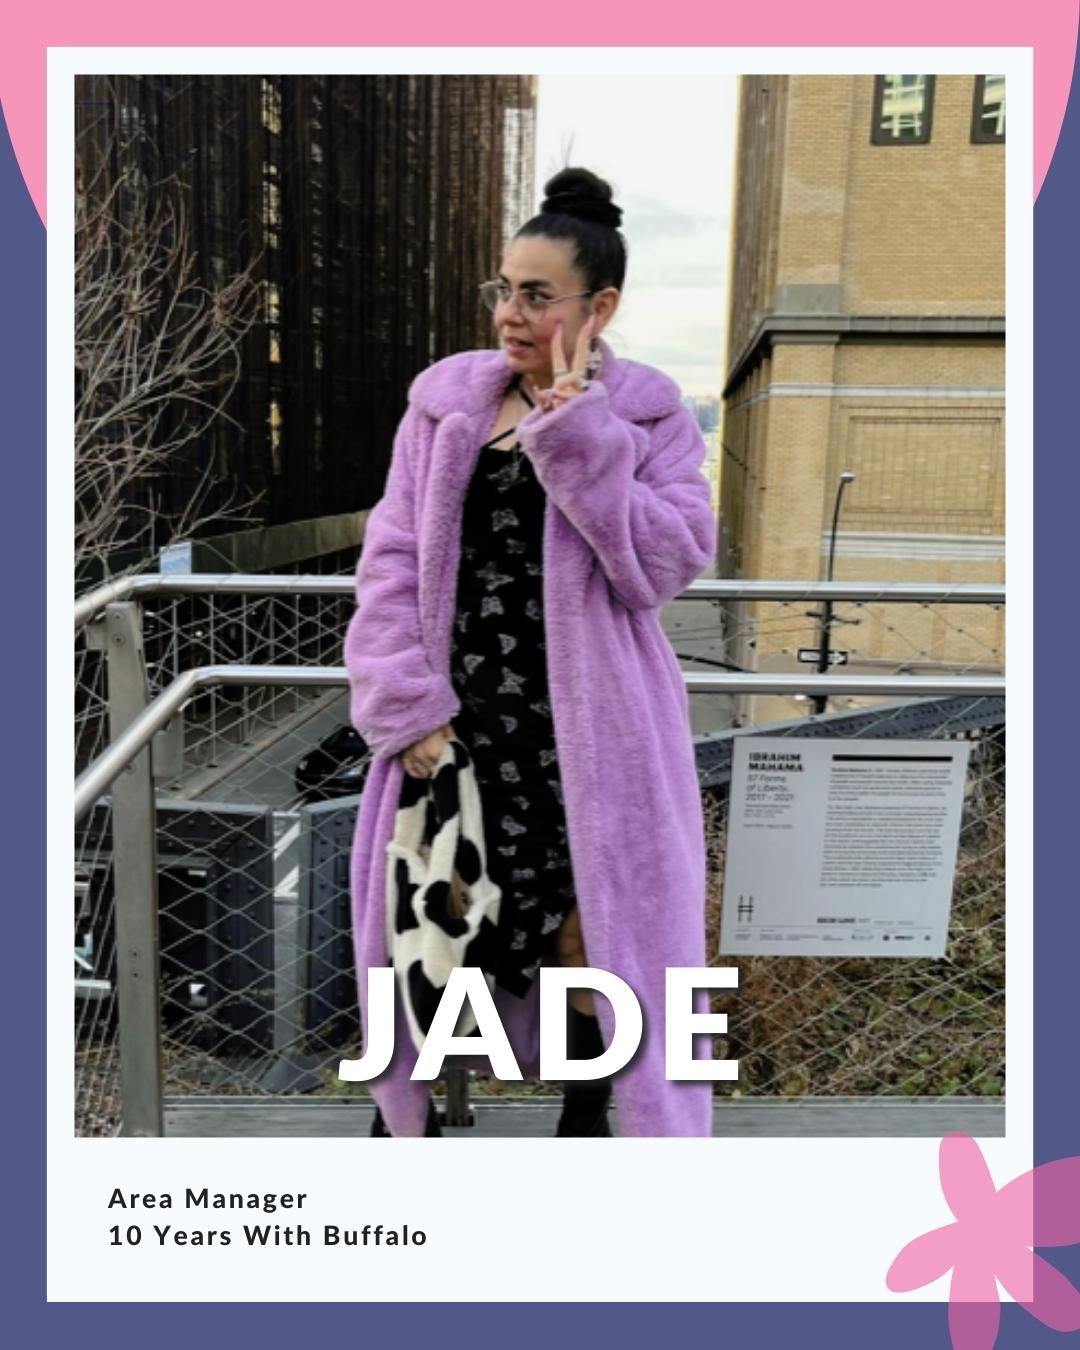 Jade wearing purple fuzzy coat; reads Area Manager, 10 Years With Buffalo Exchange